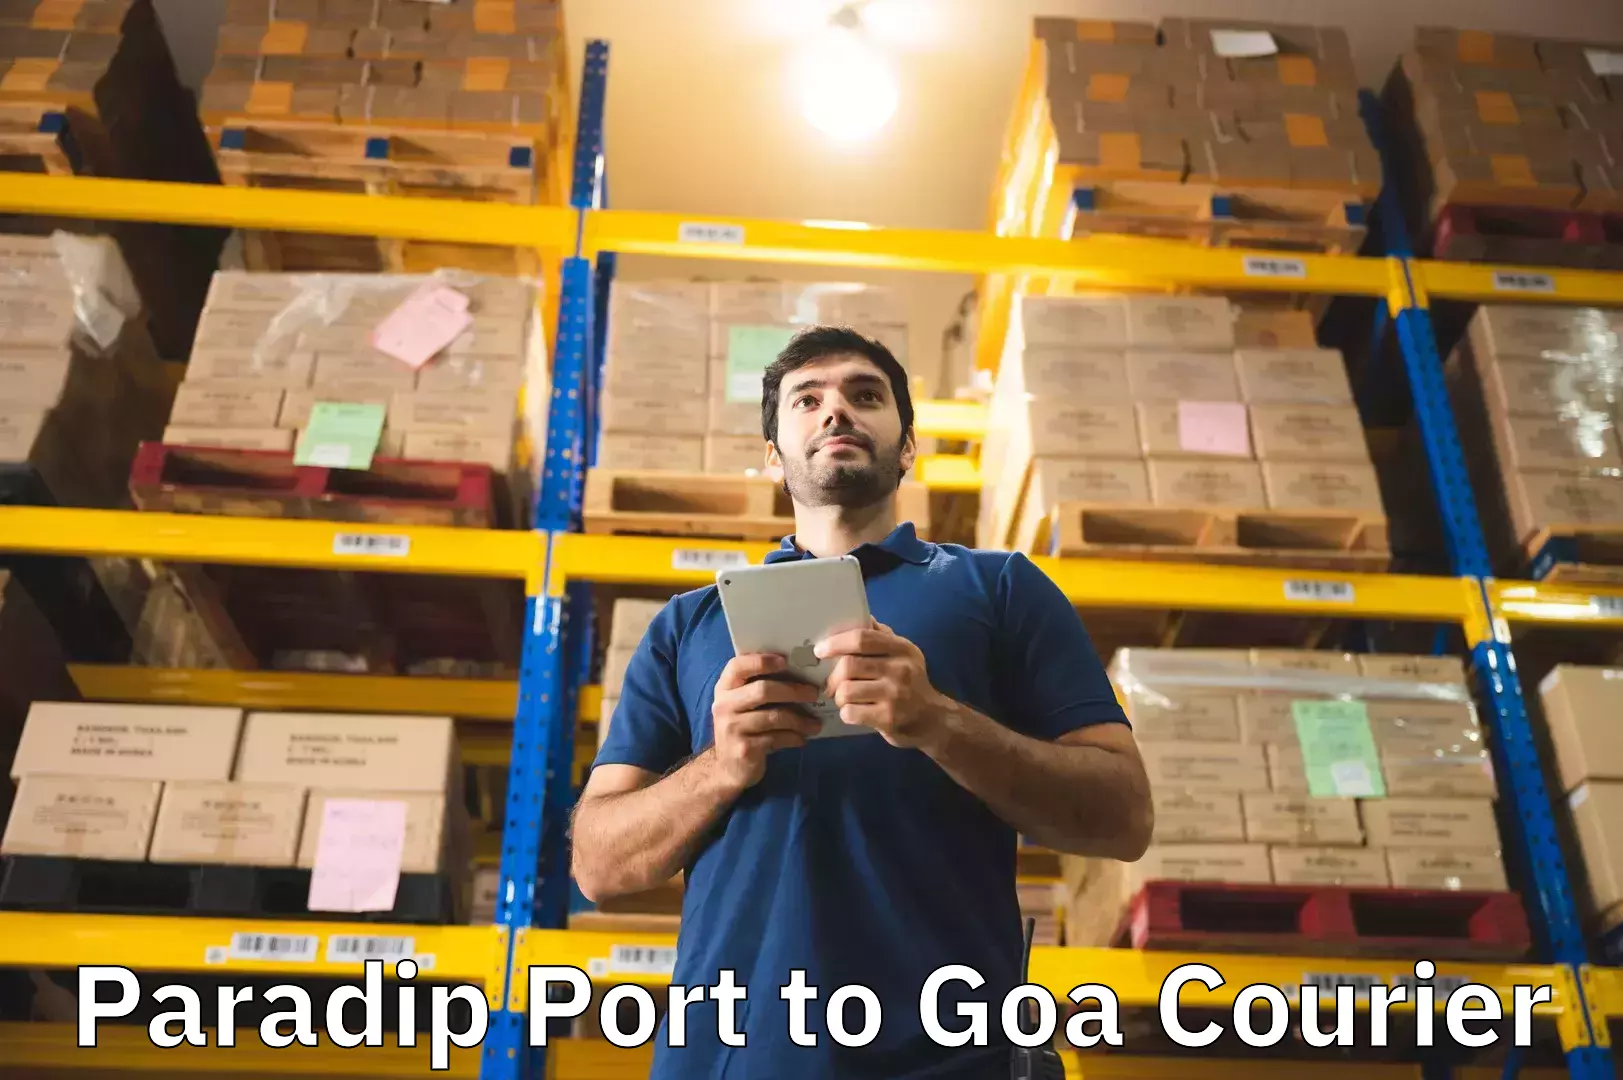 Baggage transport network Paradip Port to Margao